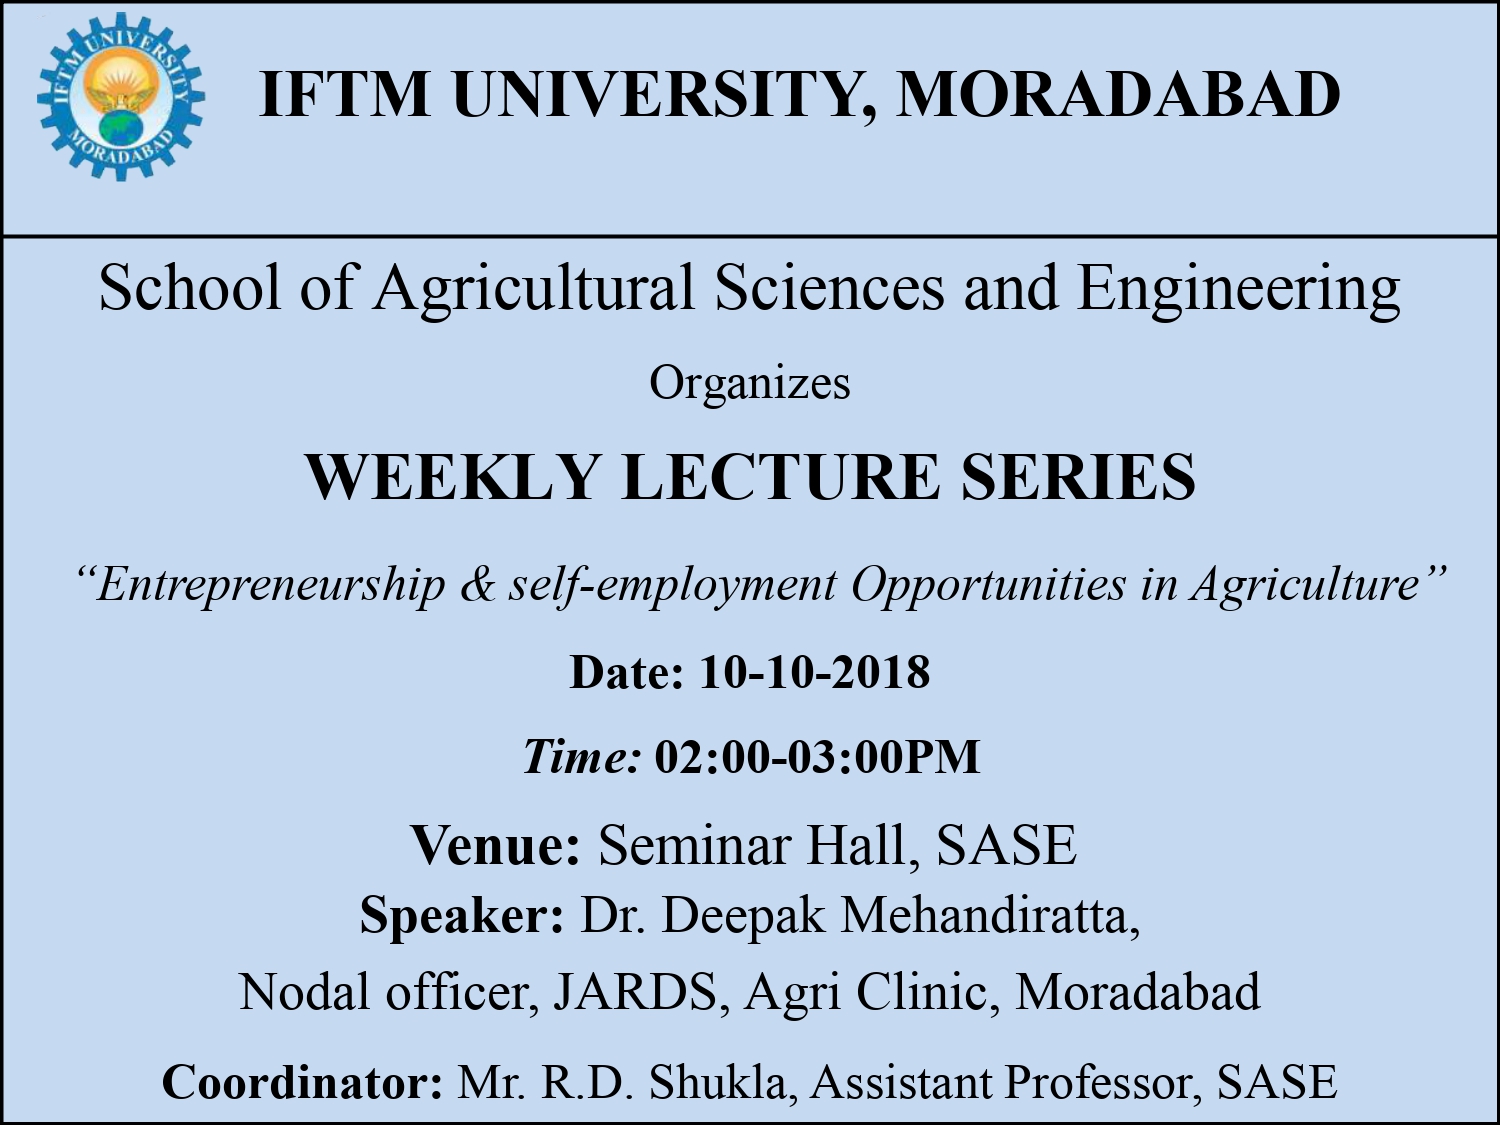 Weekly Lecture Series: “Entrepreneurship & self-employment Opportunities in Agriculture”